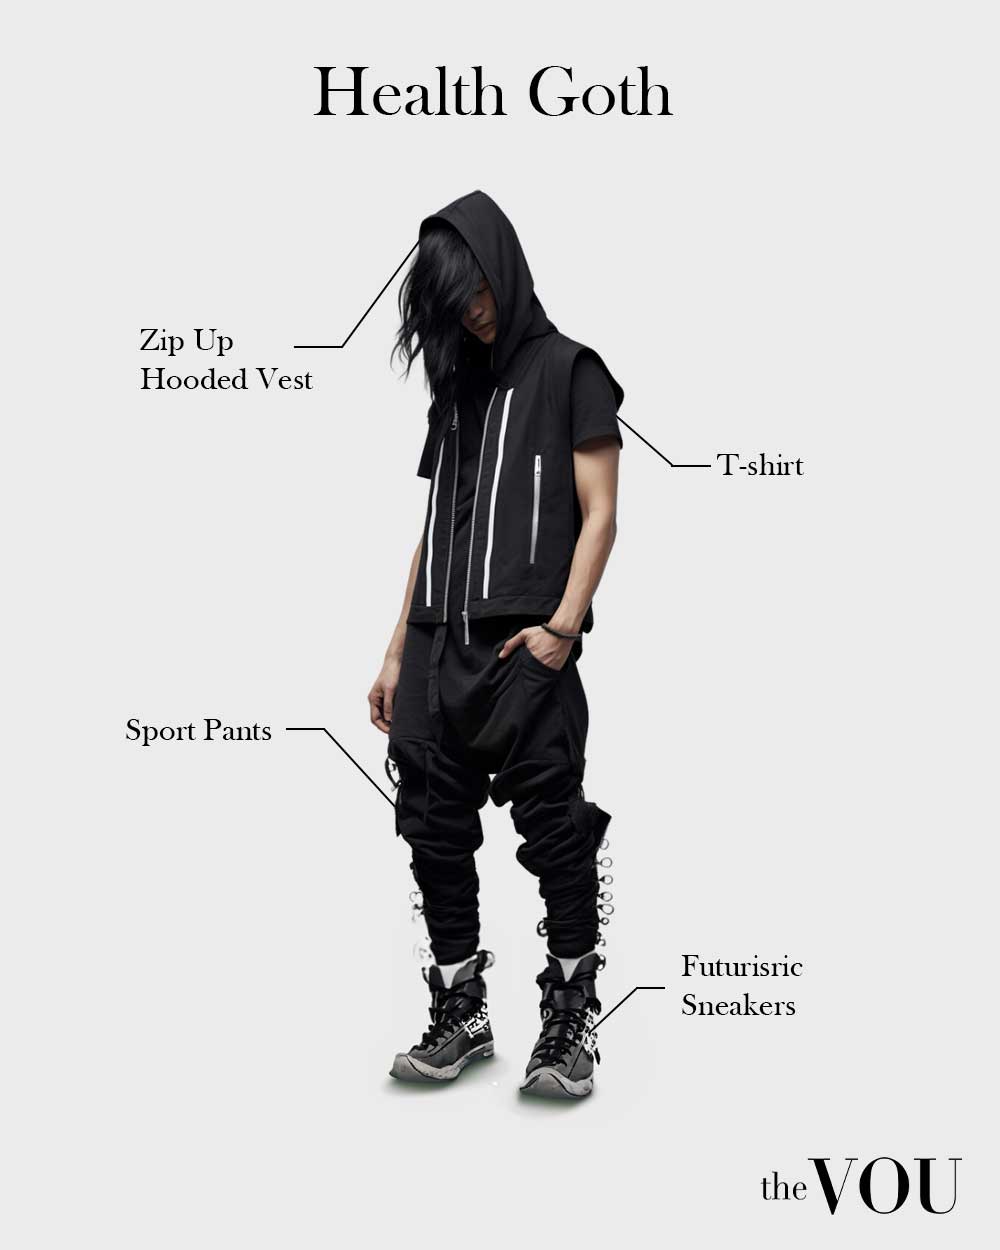 health goth outfit elements